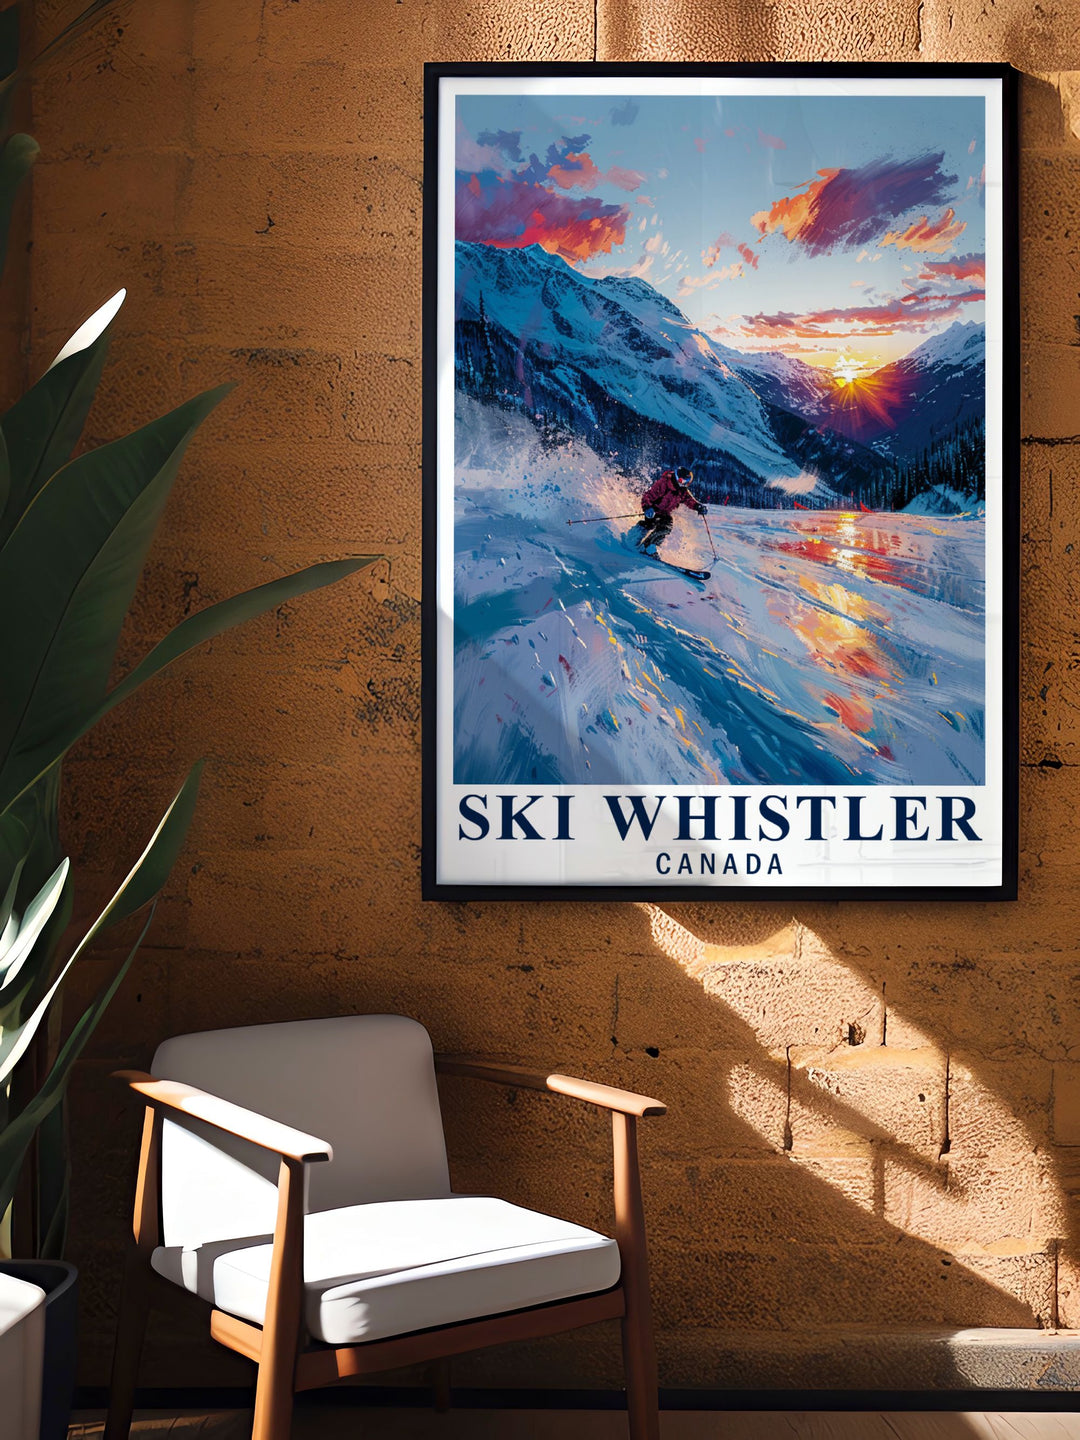 Featuring the vibrant winter scenery of Whistler, this travel poster is perfect for those who love skiing and the breathtaking beauty of the Canadian Rockies.